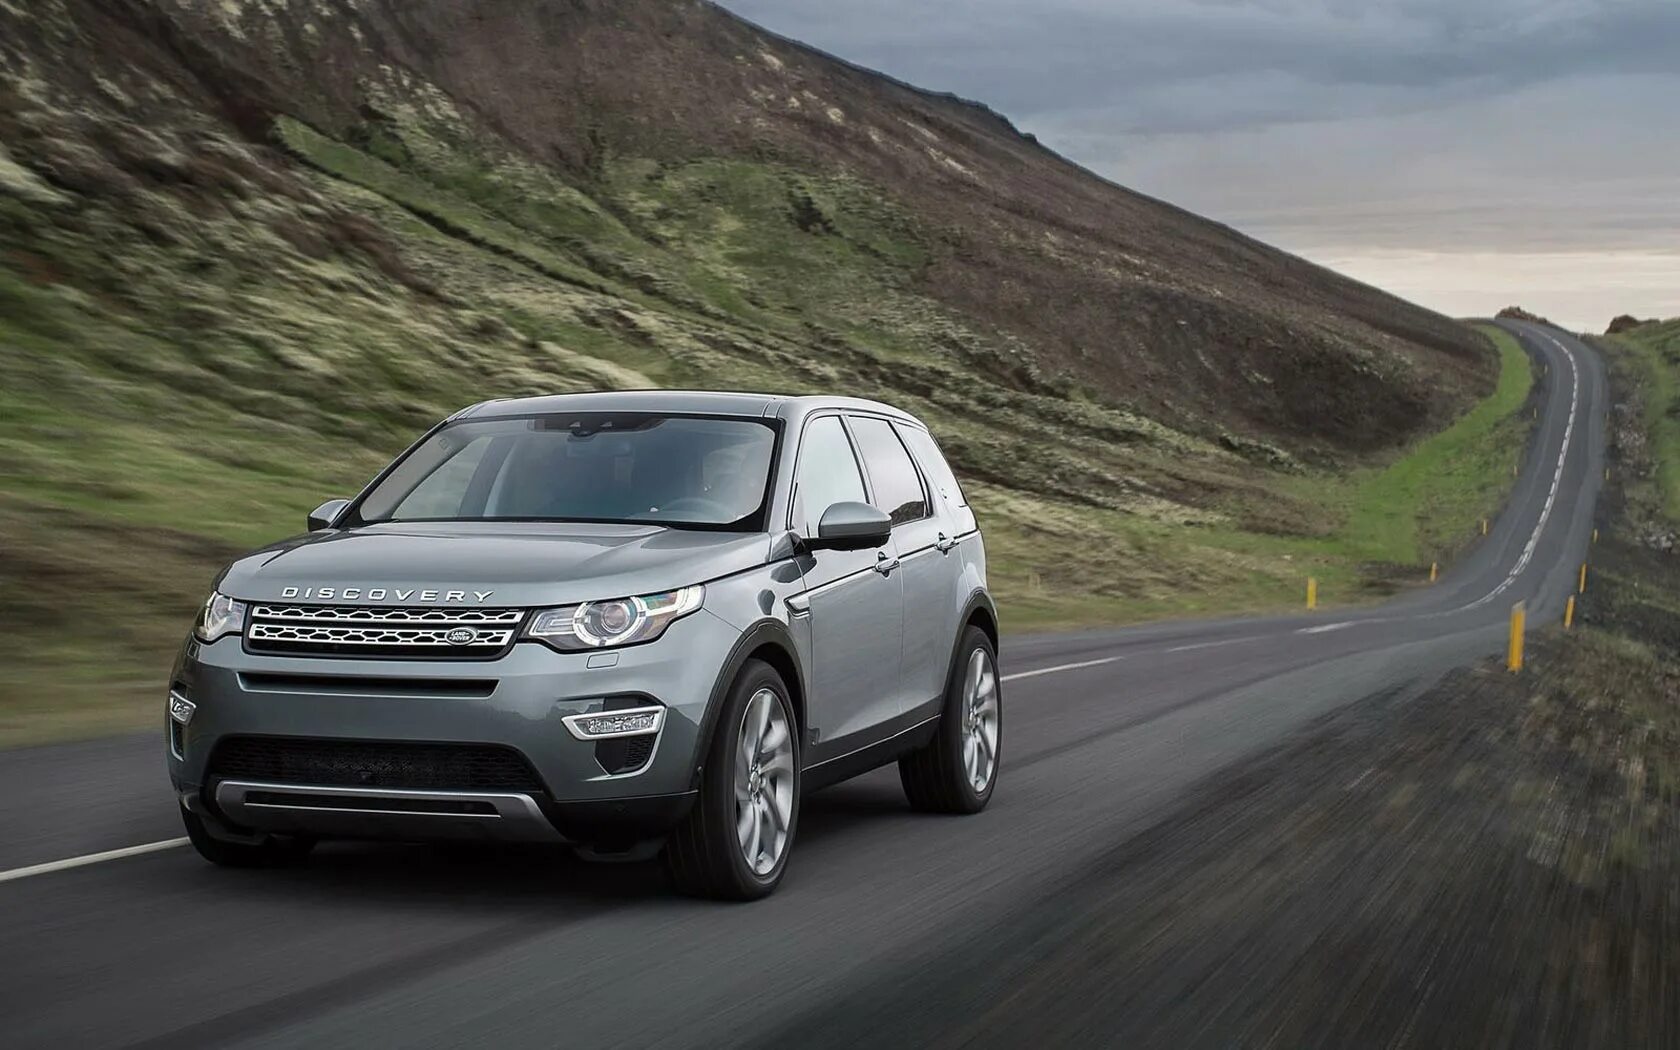 Land Rover Discovery Sport 2015. Ленд Ровер Дискавери спорт 2015. Ленд Ровер Дискавери 2015. Дискавери спорт 2022. Land rover sport 2015